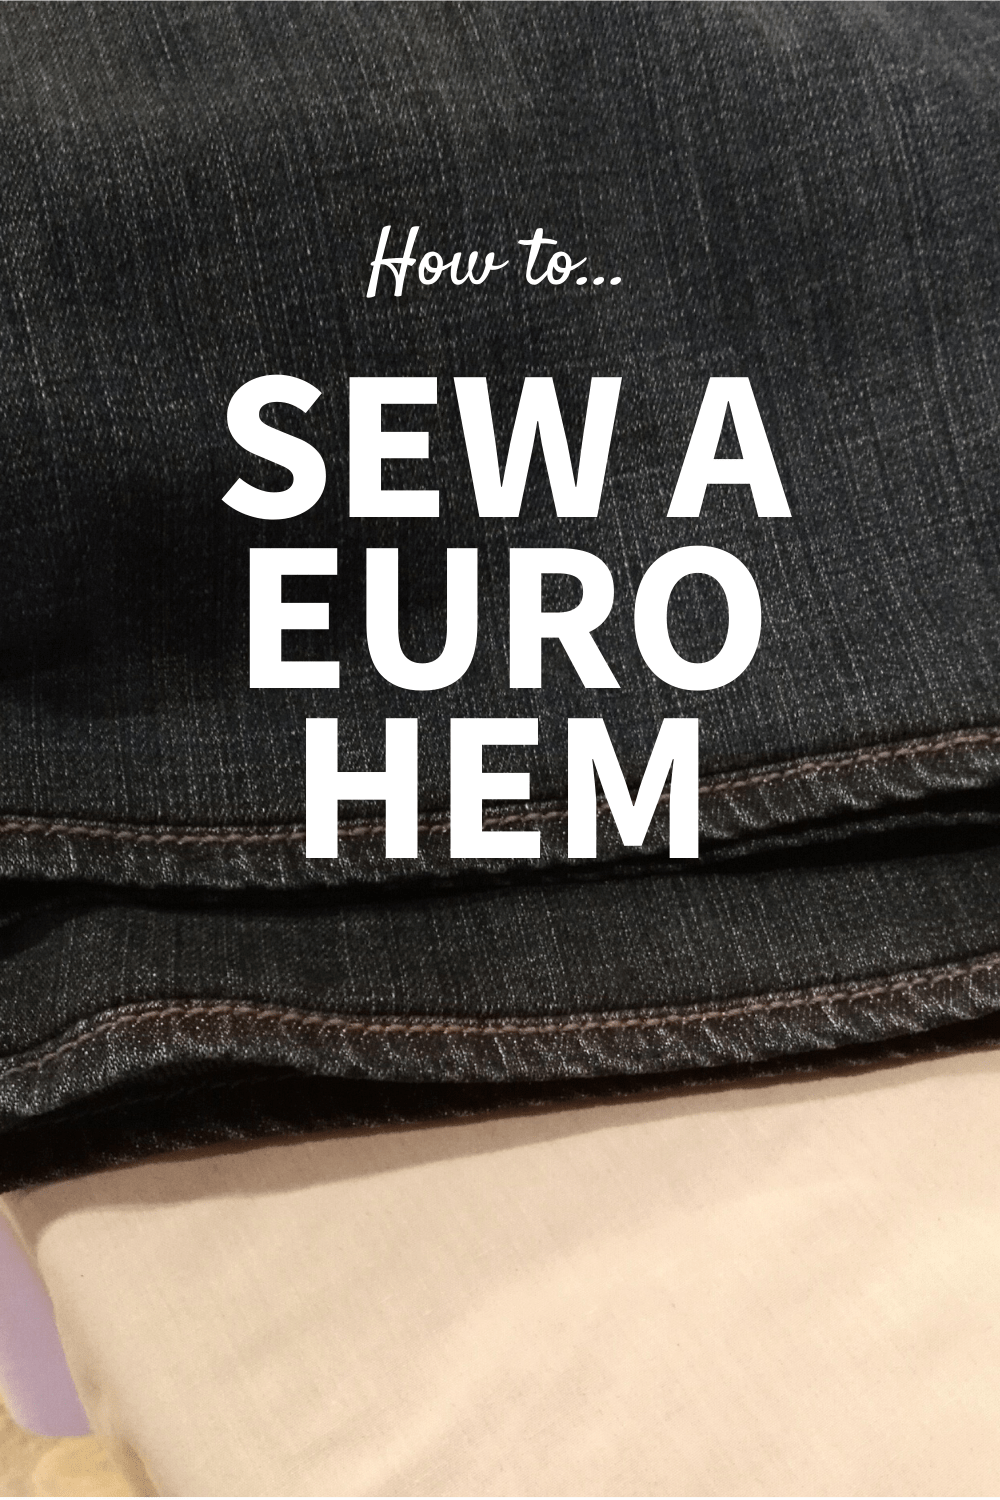 Your jeans might look weird after hemming them becuase you cut off the, how to hem jeans